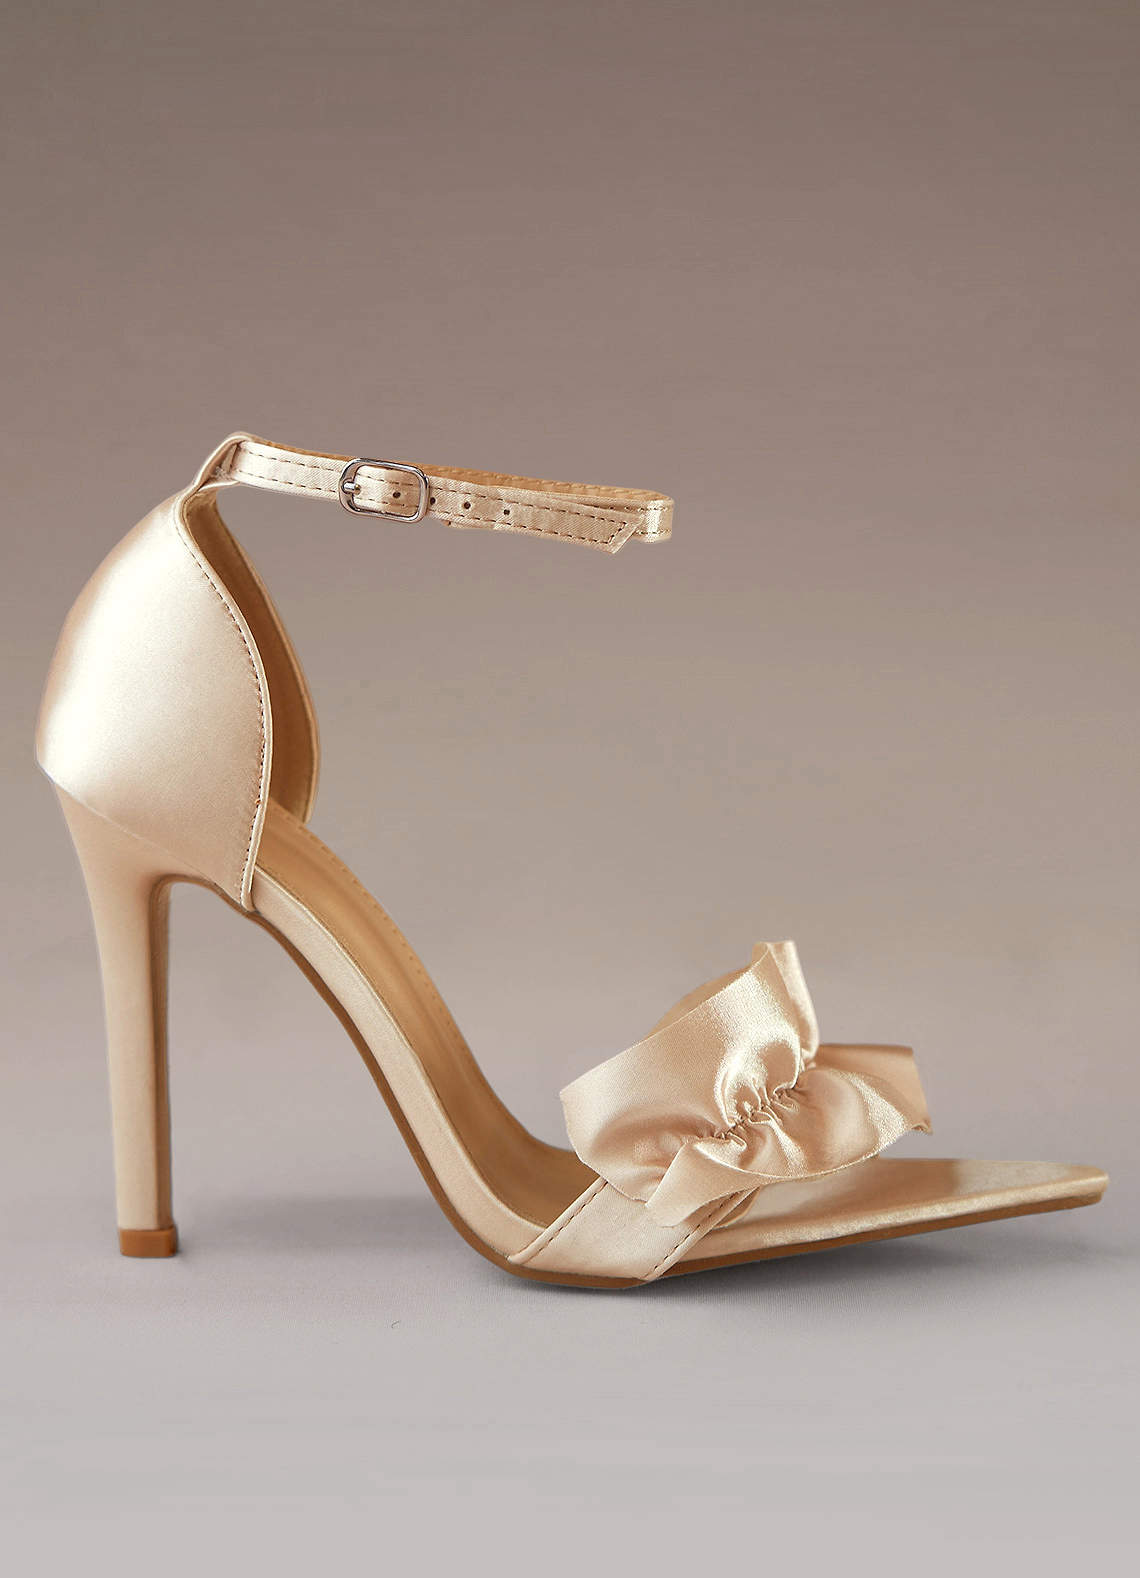 Luxury Champagne Stiletto Blush Pink Heels Wedding With Beaded Silk,  Rhinestone Embellishments, And Buckle Designer Poined Toe Bridal Shoes 316p  From Wedsw96, $52.71 | DHgate.Com